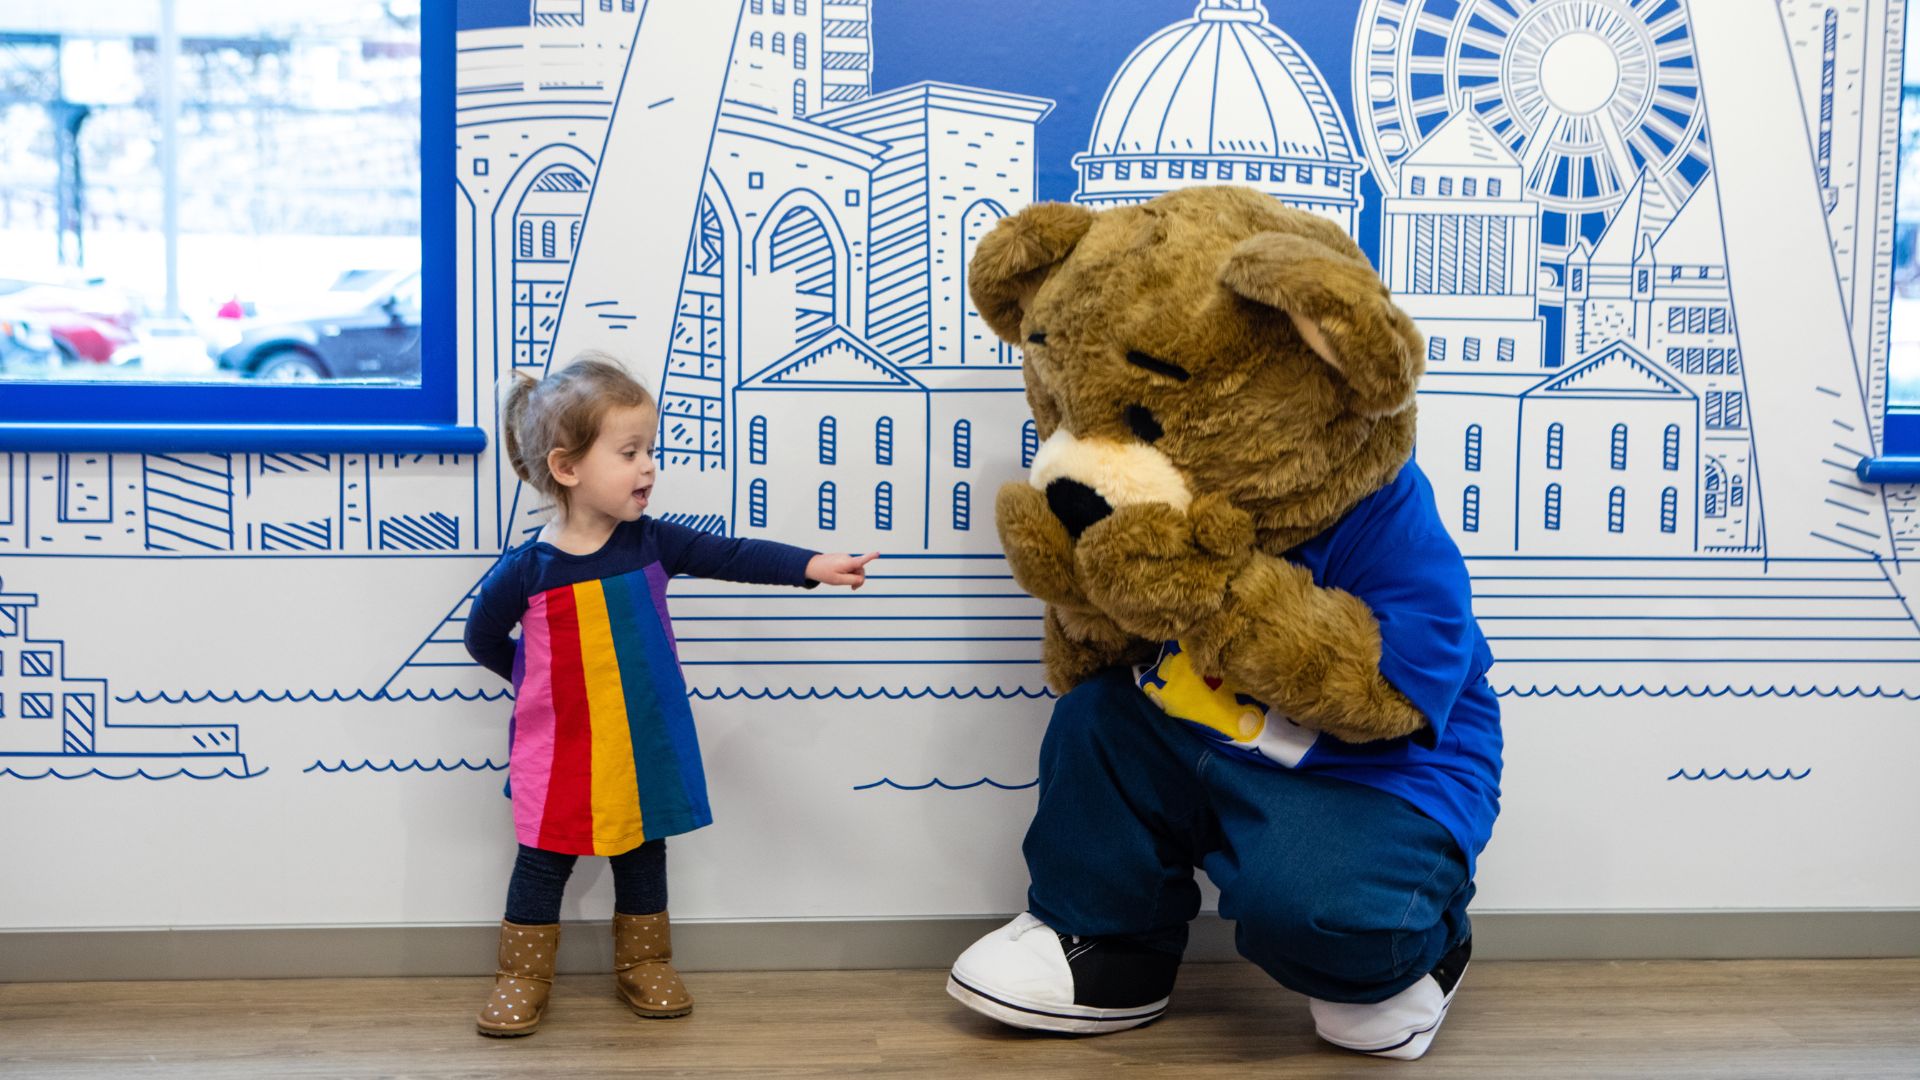 A young girl interacts with an oversized teddy bear at Build-A-Bear Workshop.